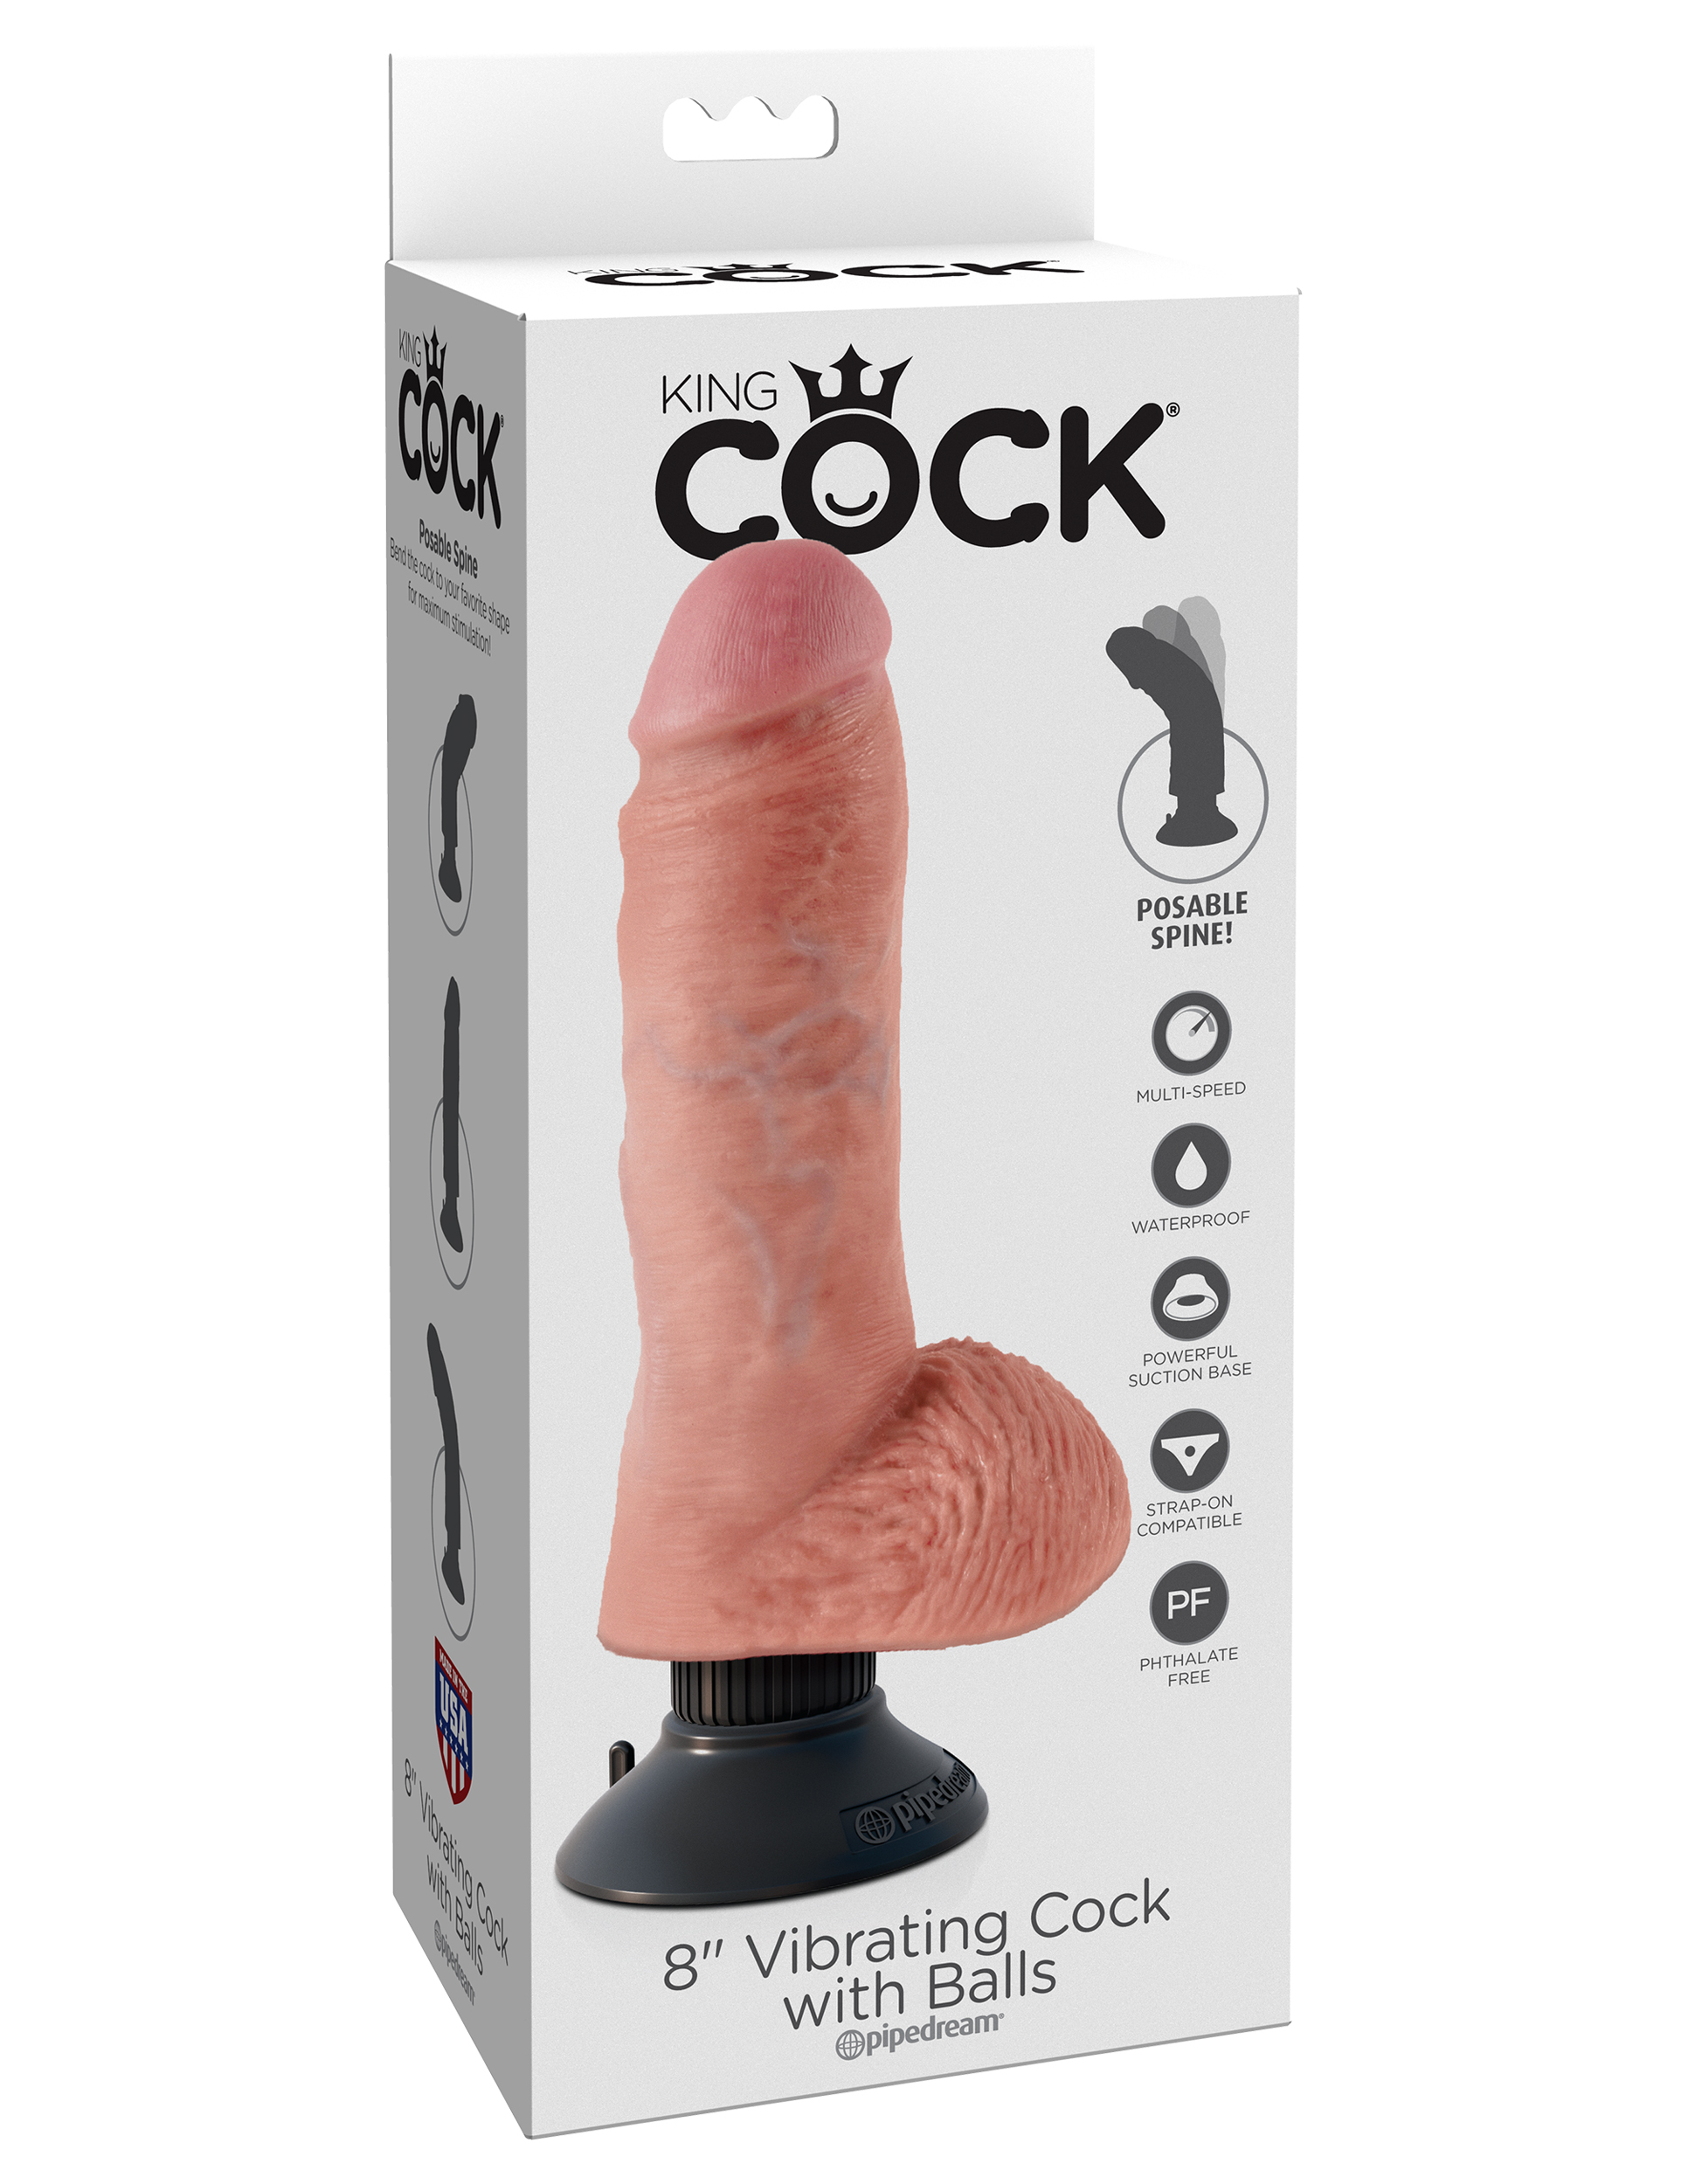  31    8 Vibrating Cock with Balls